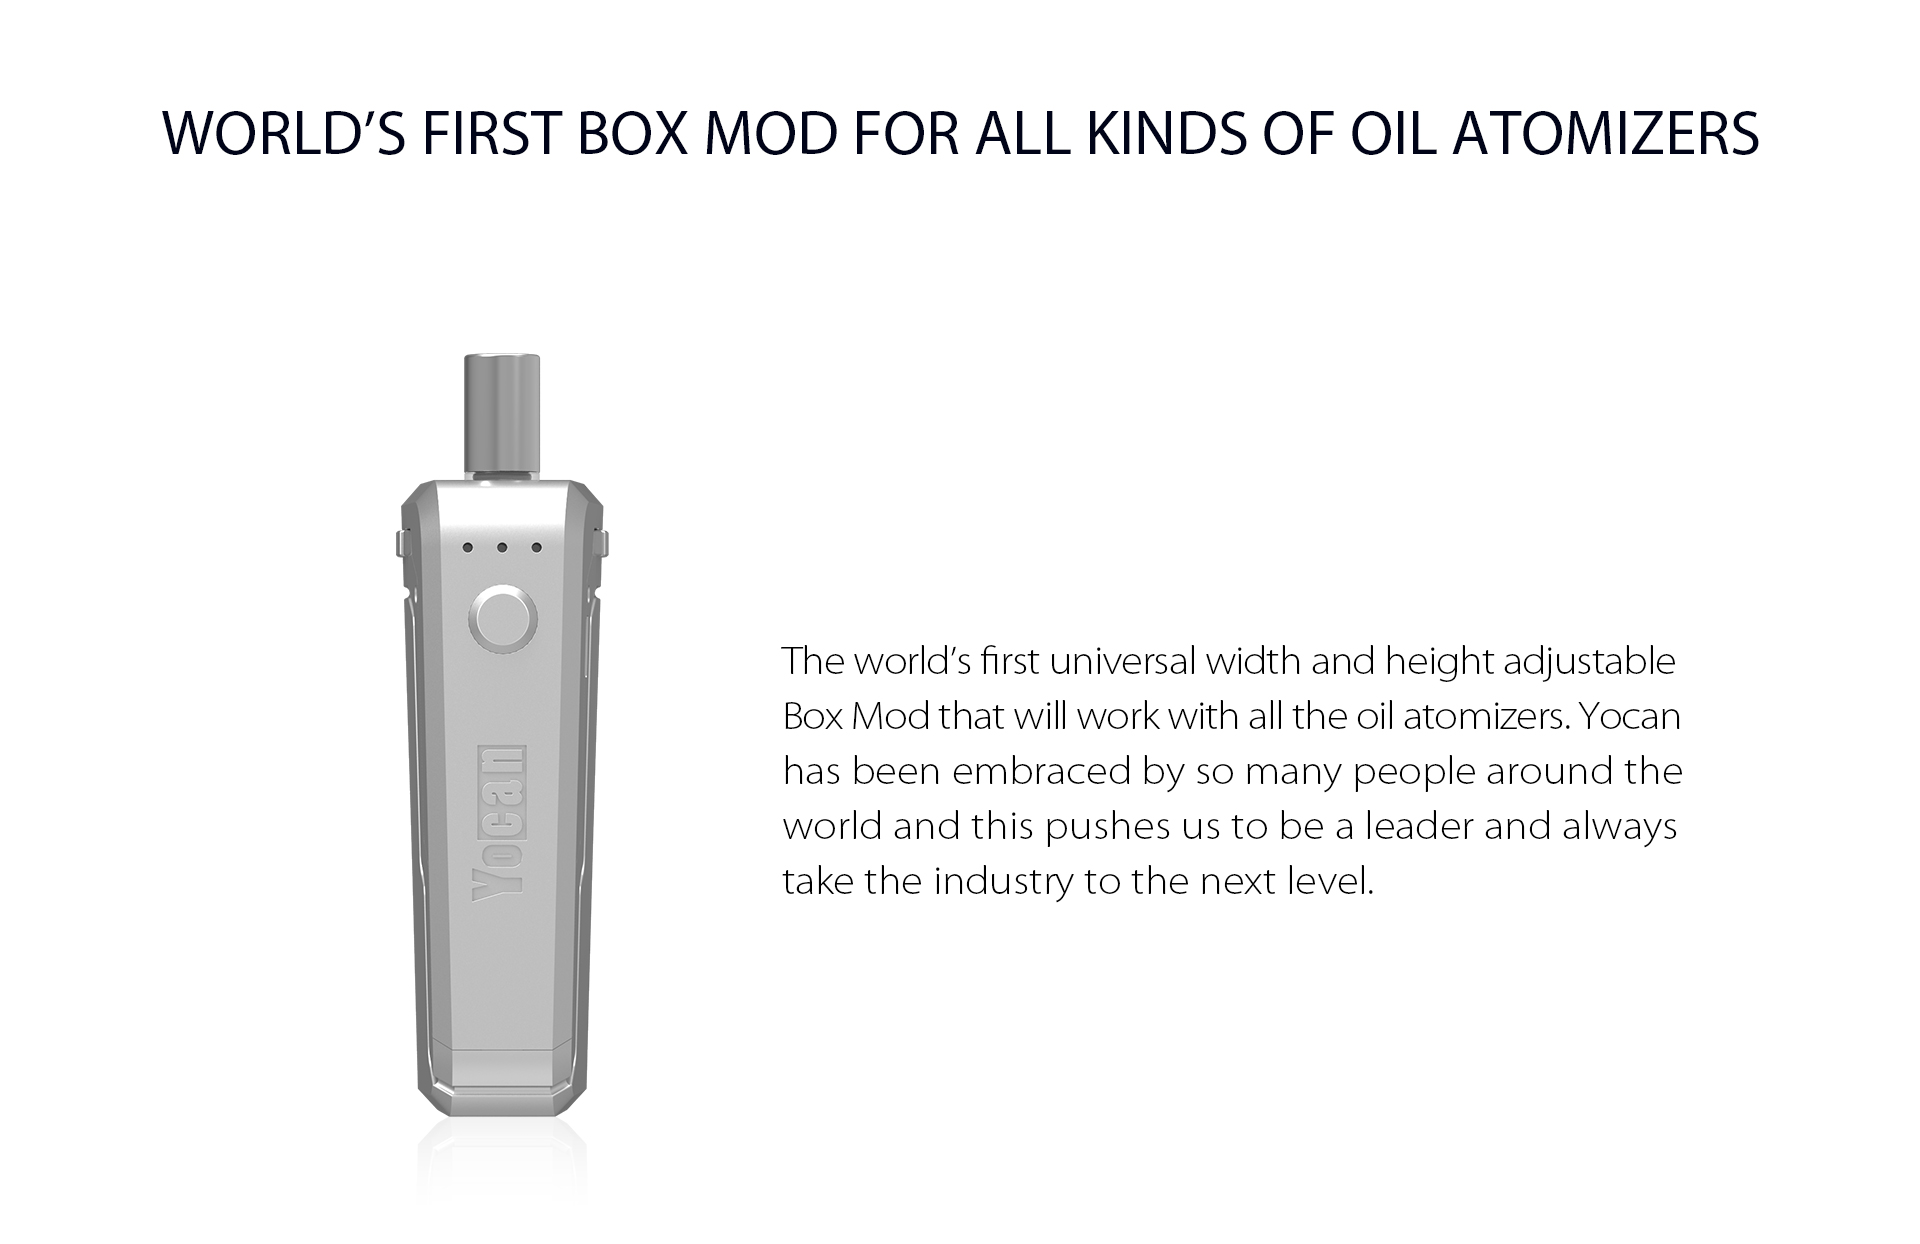 Yocan UNI is the world's first box mod for all kinds of oil atomizers.